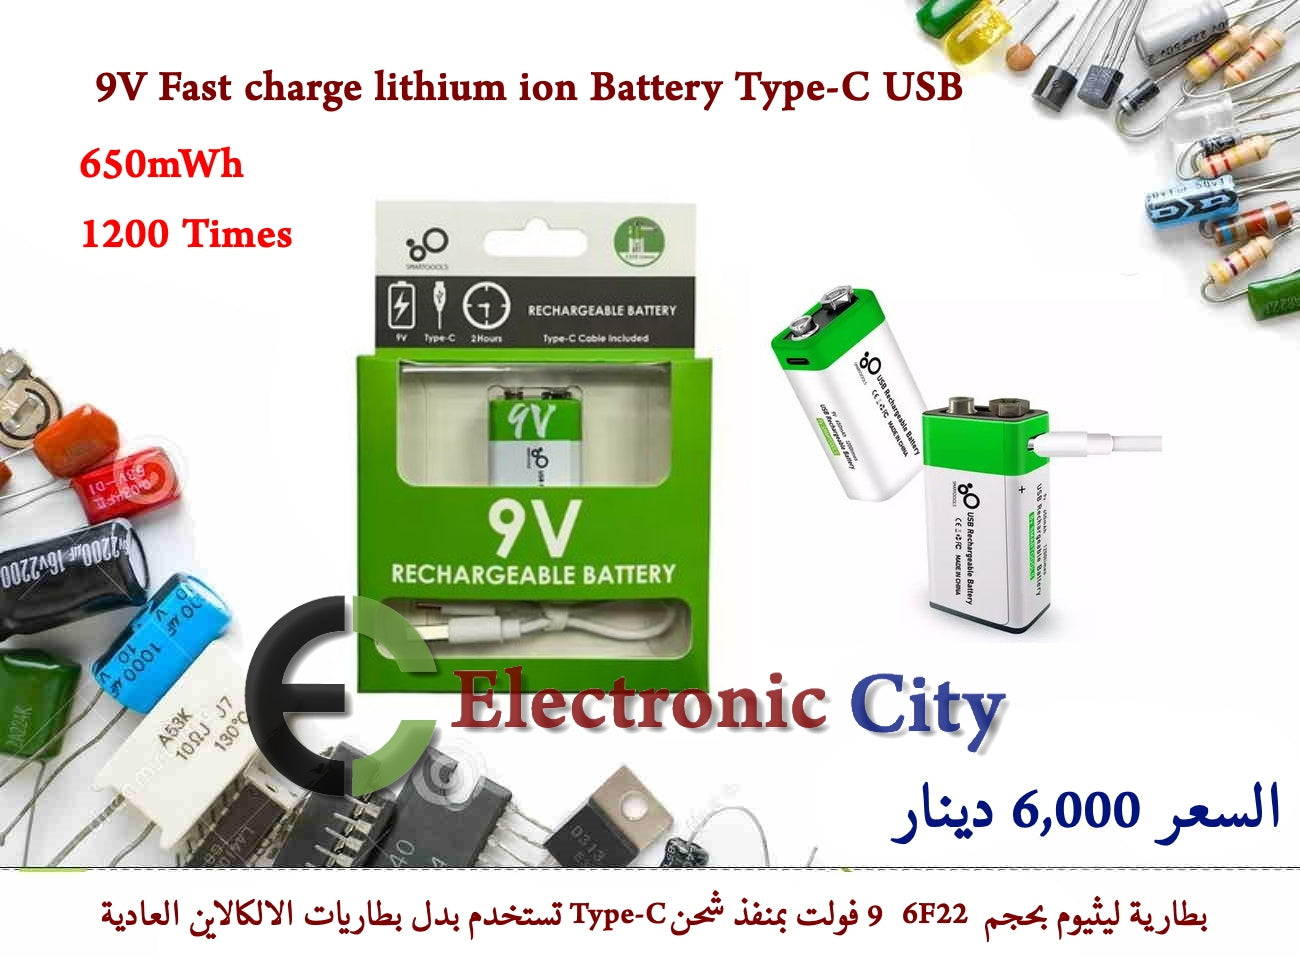 9V Fast charge lithium ion Battery 650mWh 9V Type-C USB